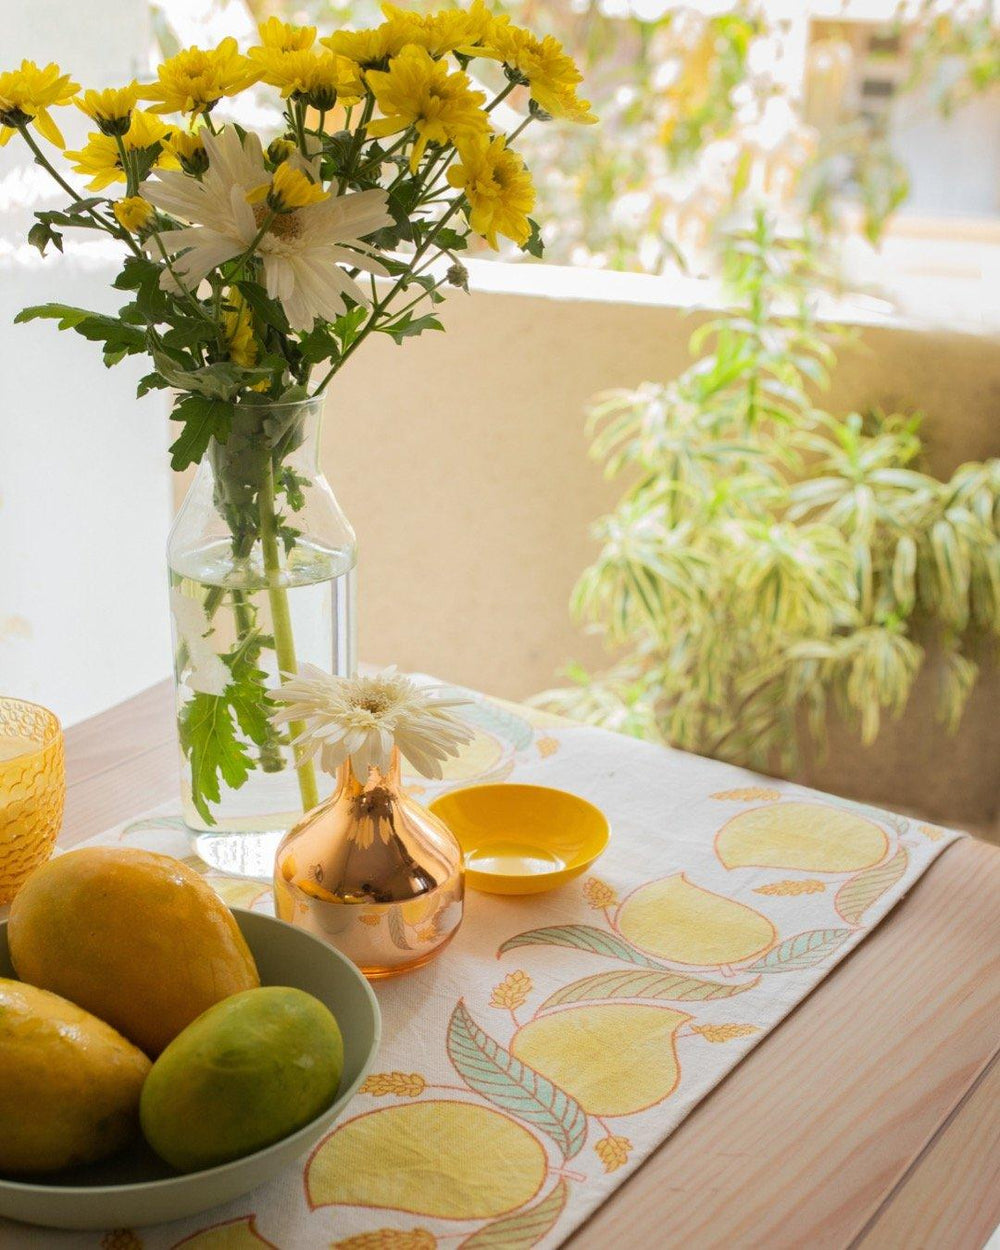 Table setting with block printed mango themed cotton table runner, a glass vase with flowers and a bowl full of mangoes